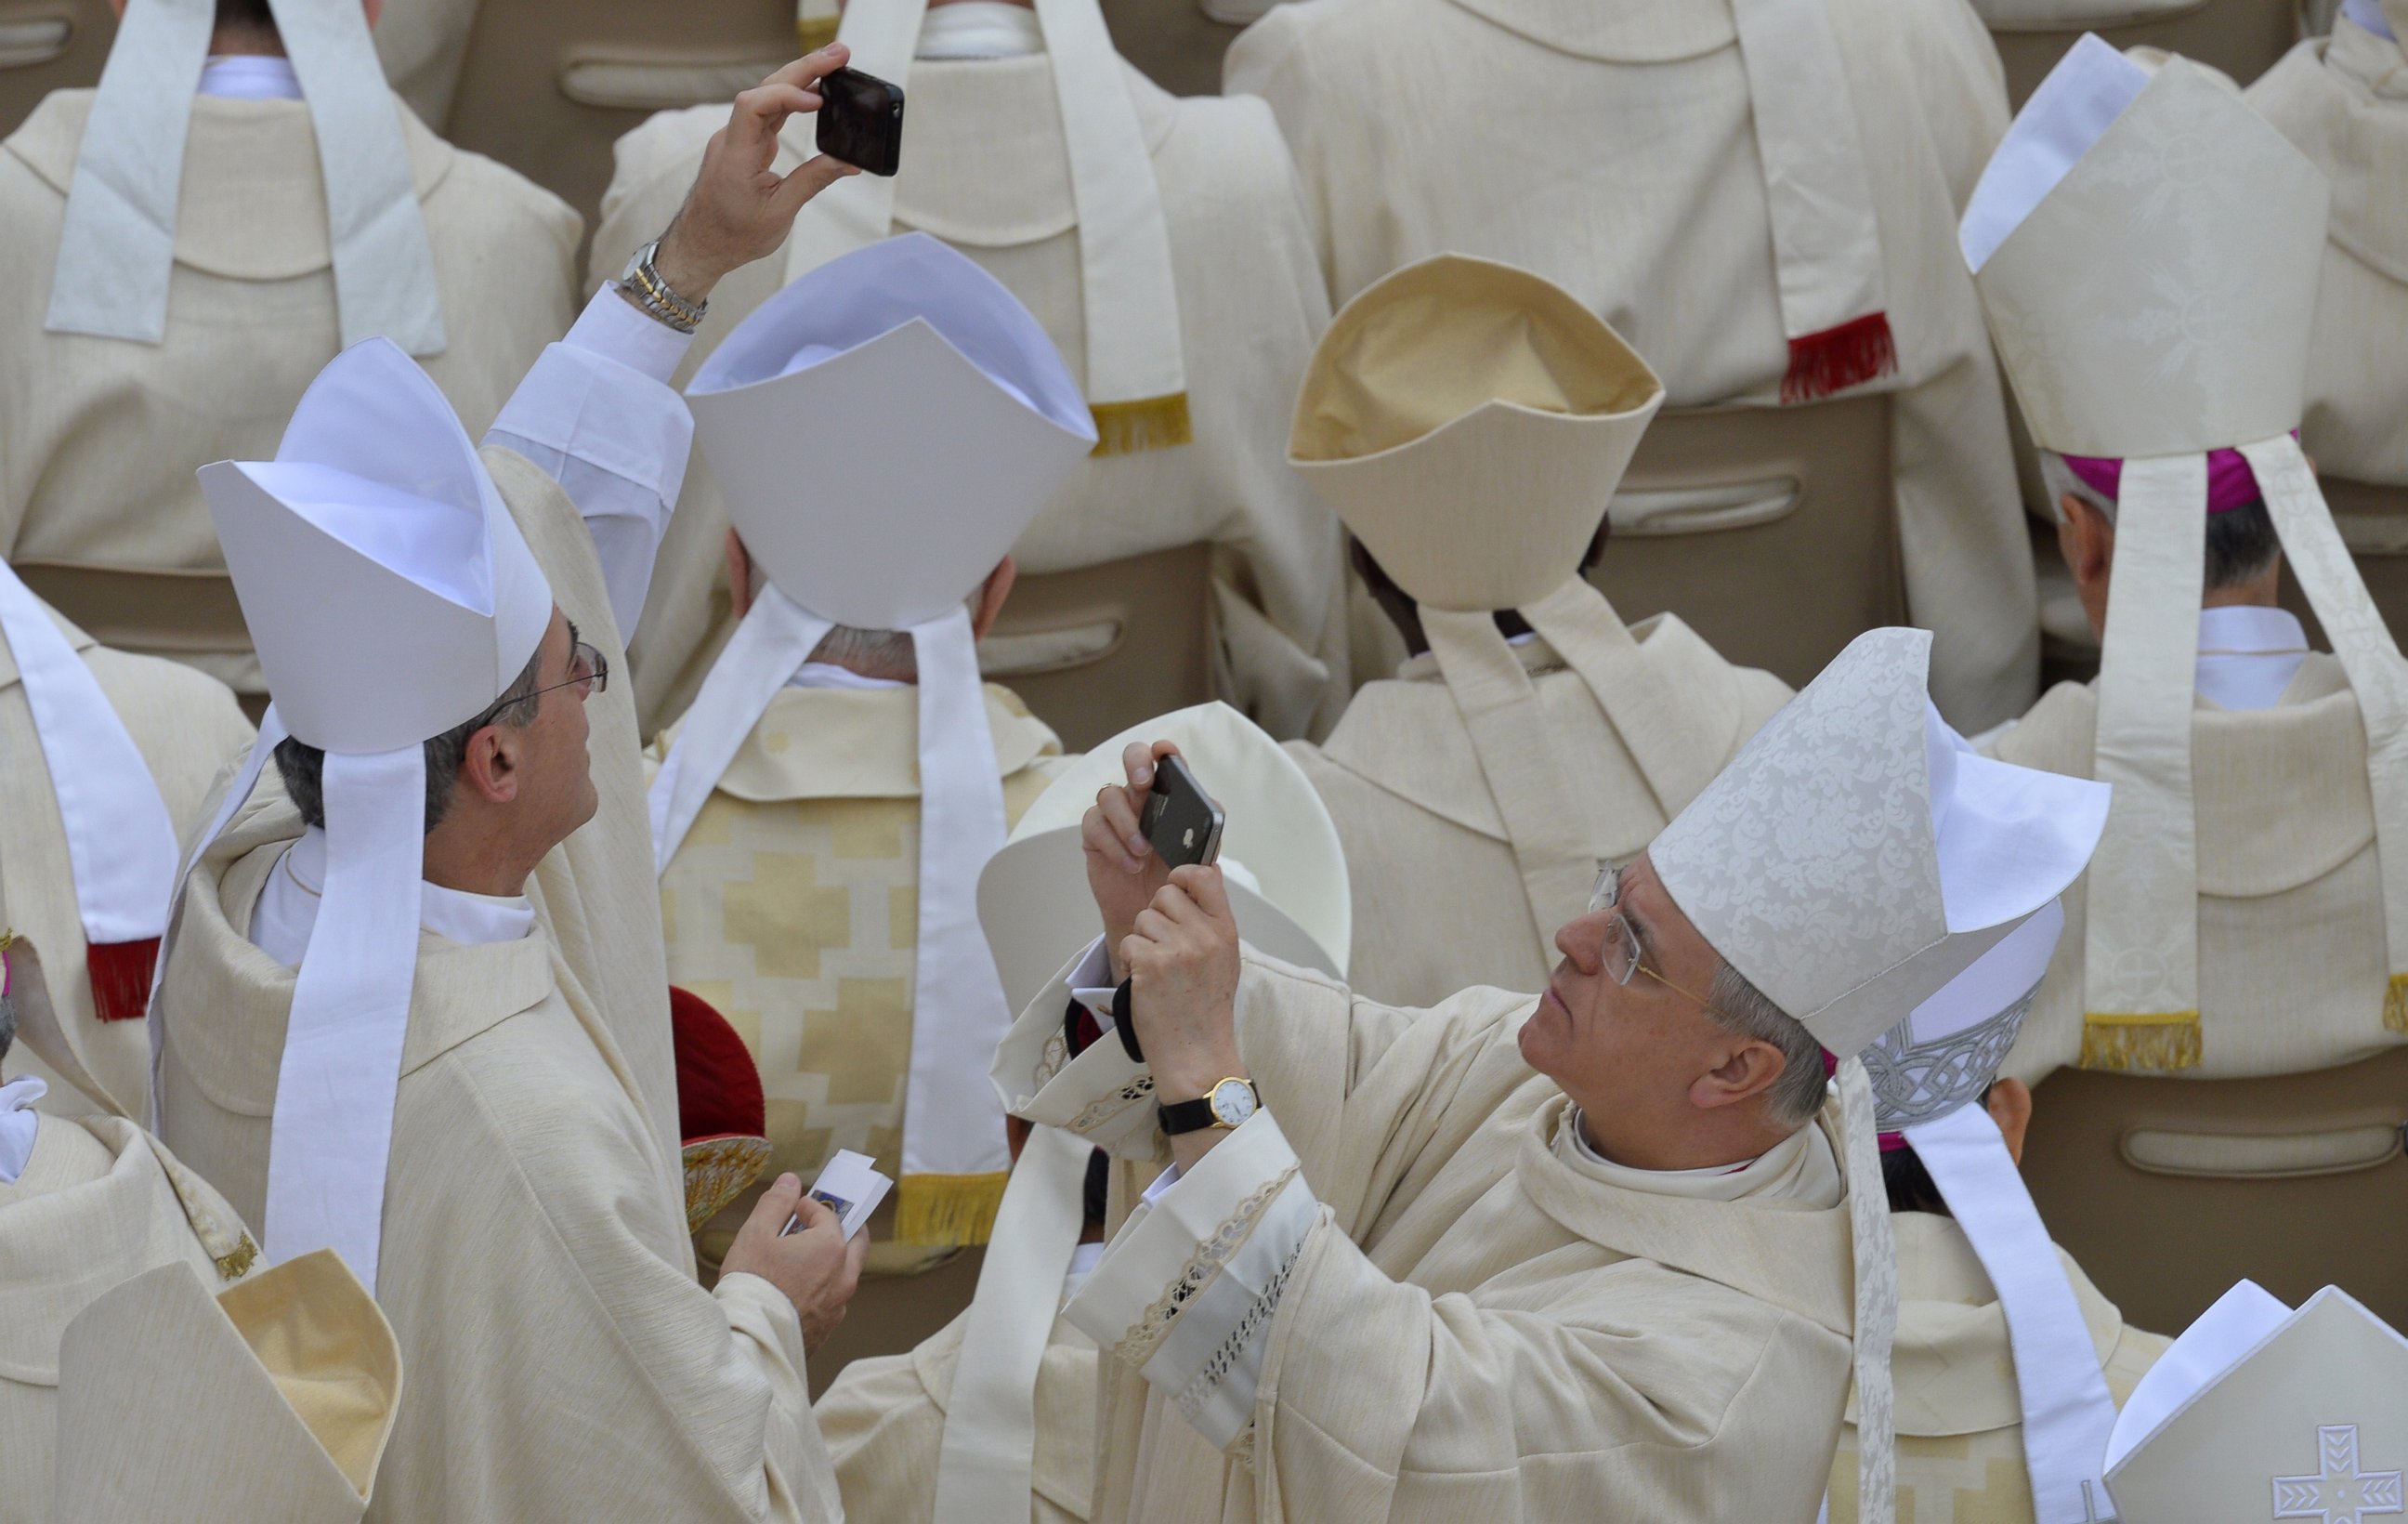 PHOTO: Bishops take pictures before the canonization mass of Popes John XXIII and John Paul II on St Peter's at the Vatican on April 27, 2014. 